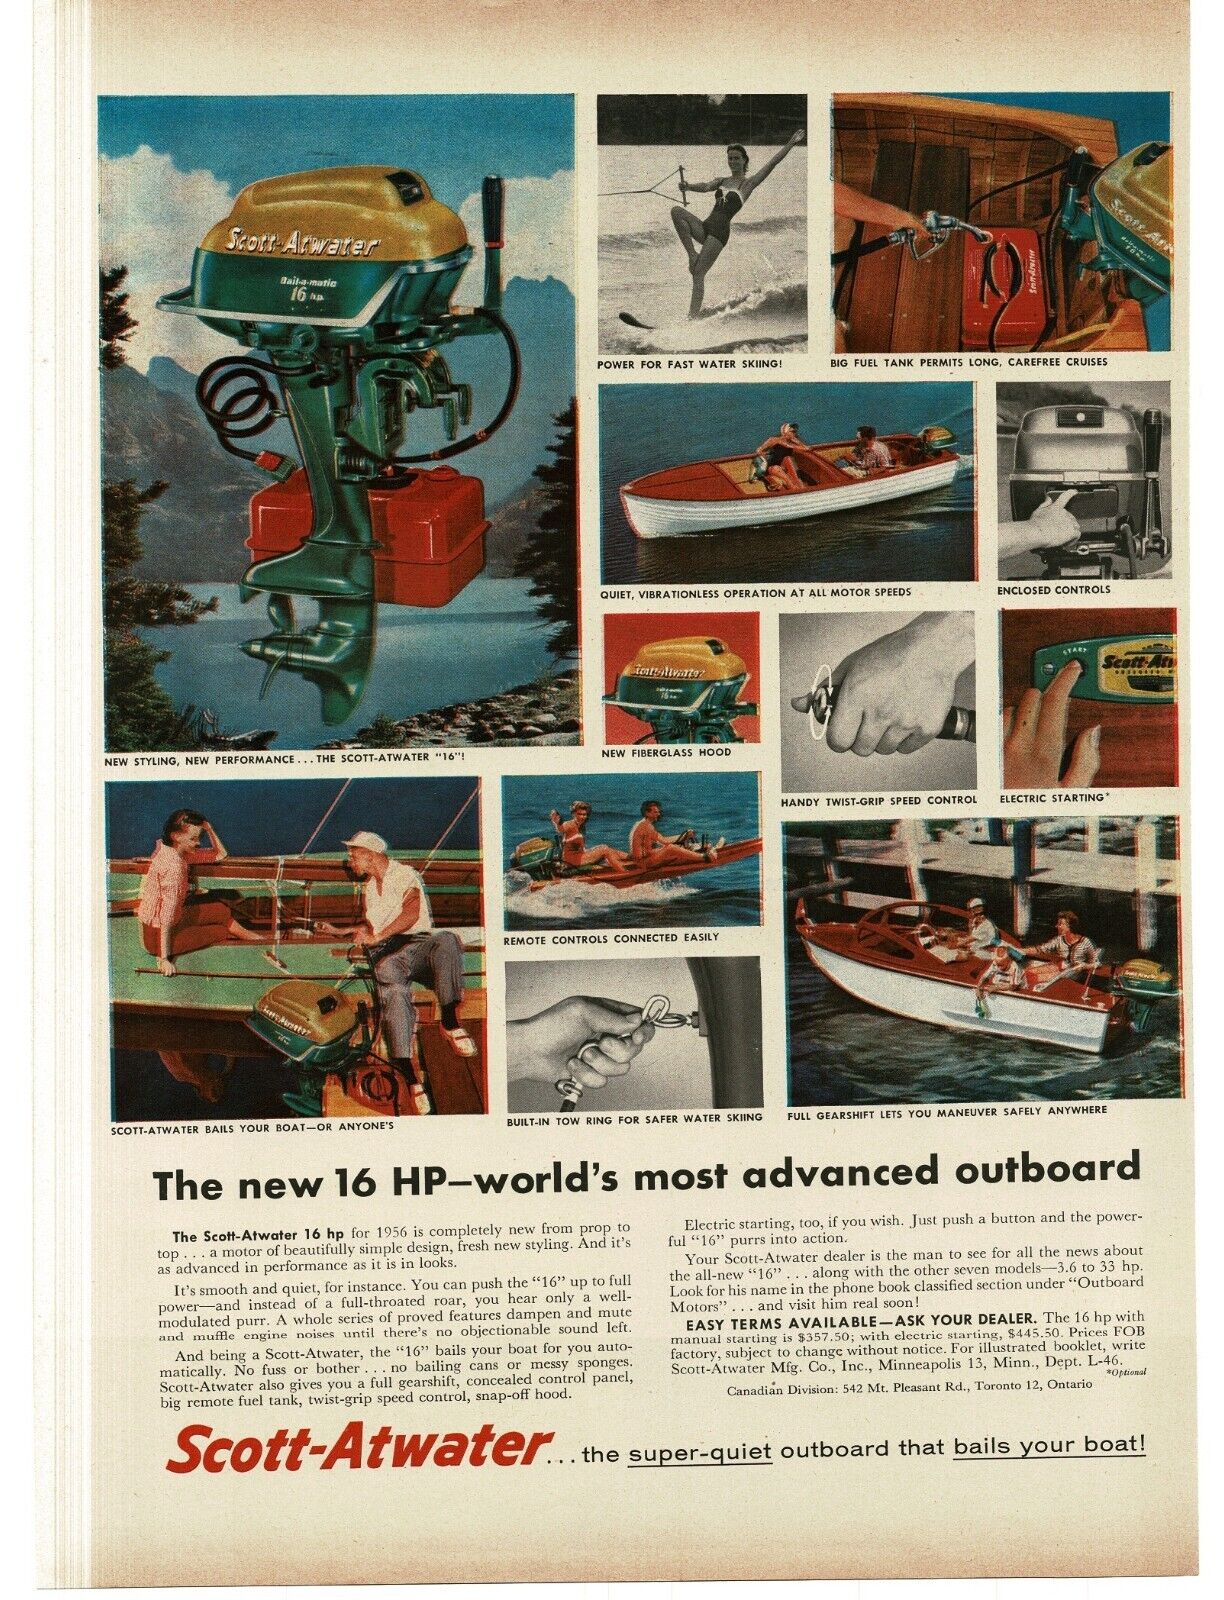 1956 Scott-Atwater 16 HP Outboard Boat Motor Vintage Print Ad